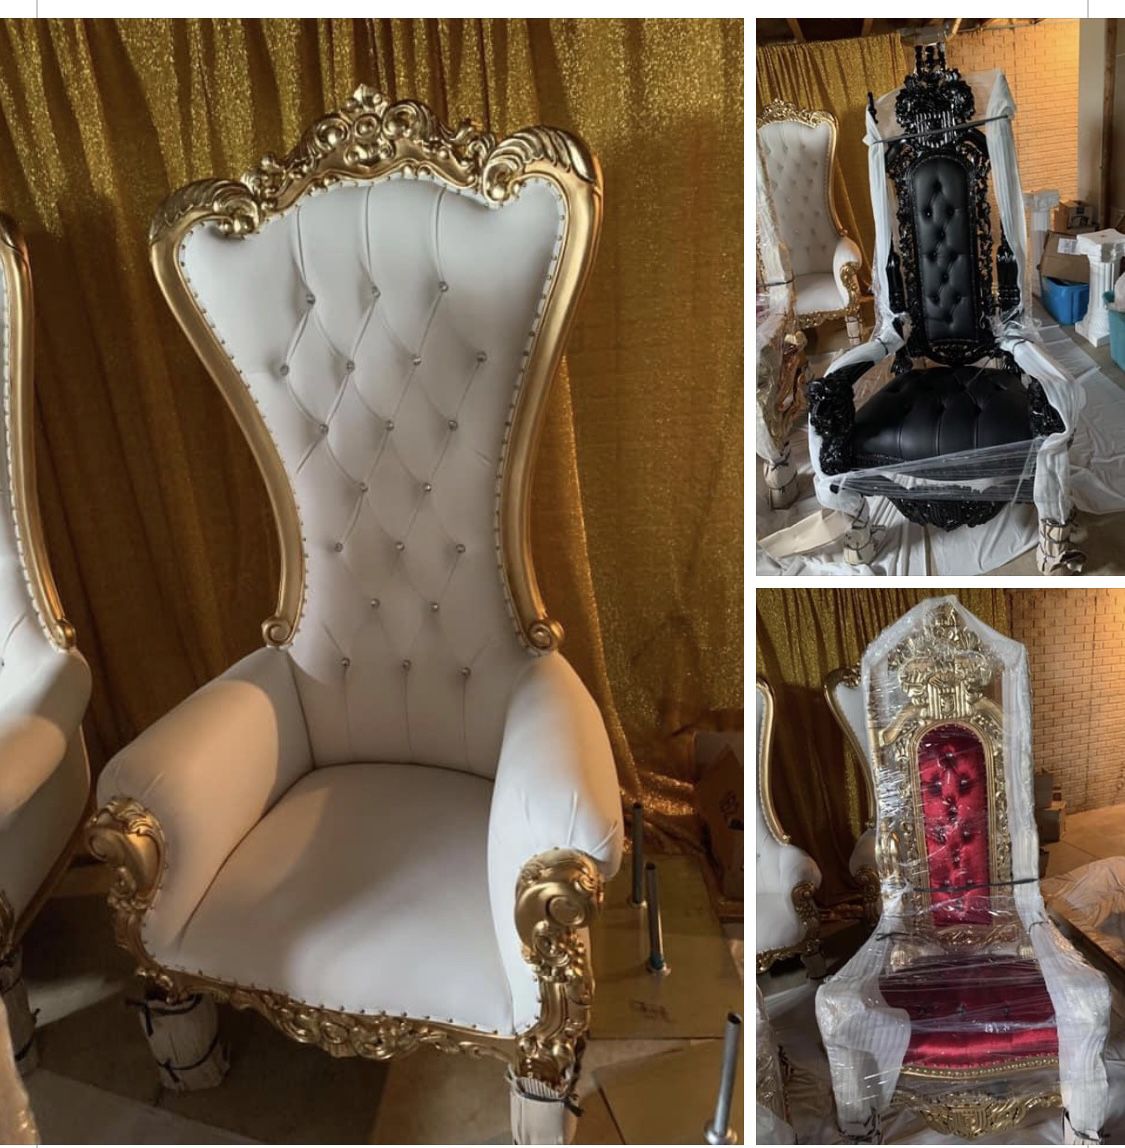 Throne Chairs Also Have Silver And White